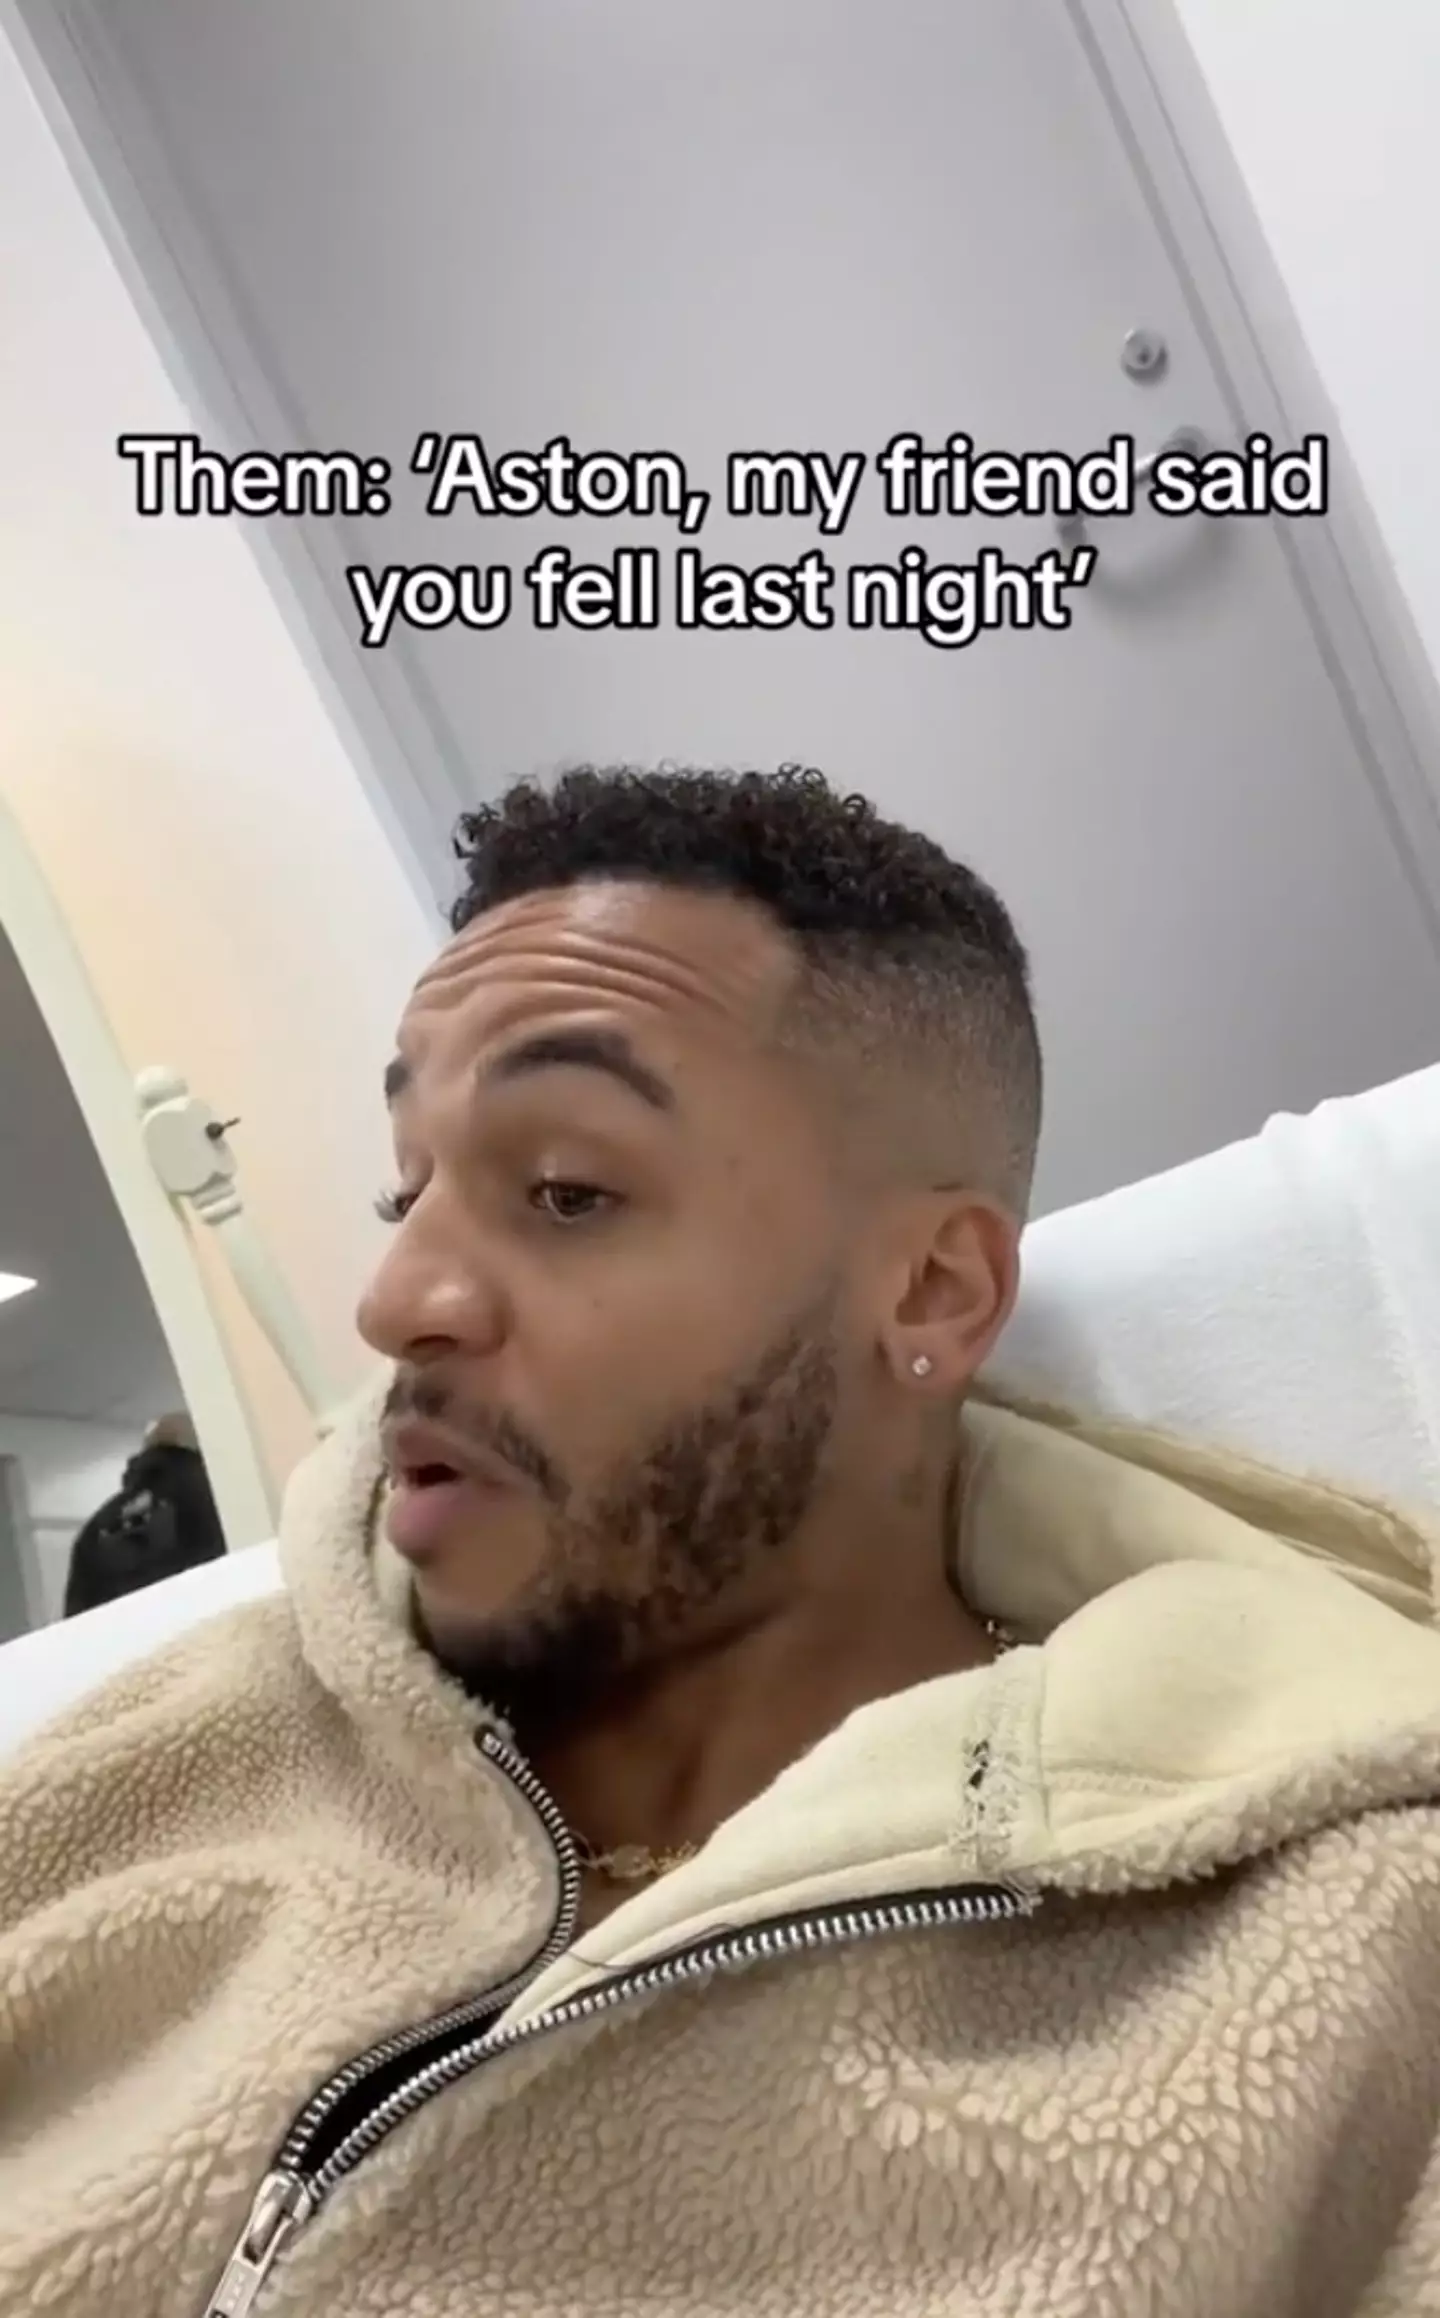 Aston Merrygold shared a hilarious response to social media users teasing him.